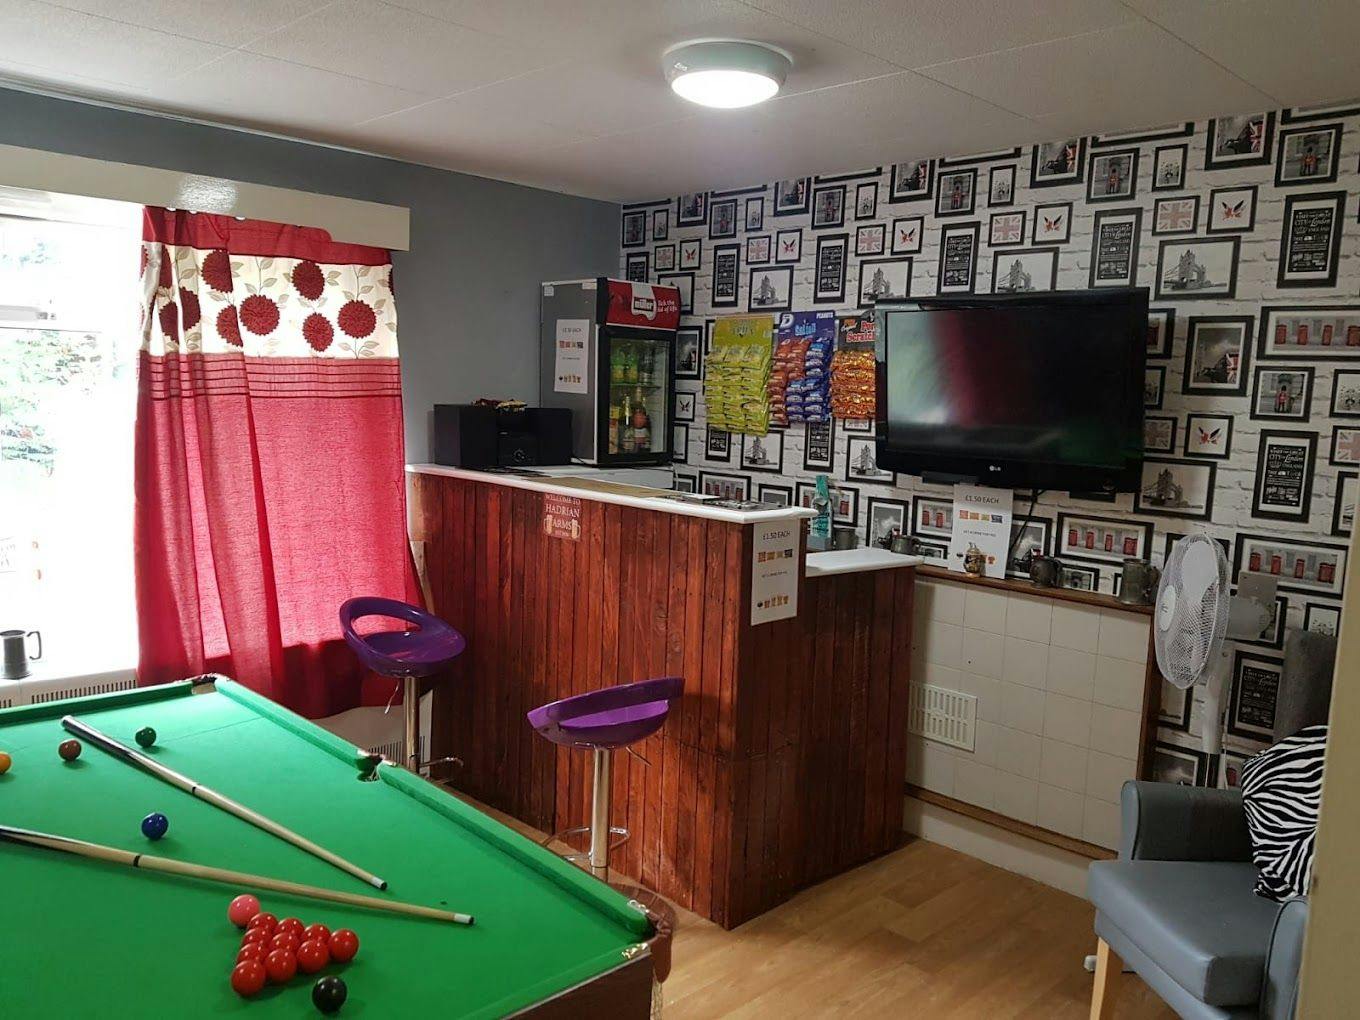 Activities Room at Hadrian House Care Home in Leicester, Leicestershire